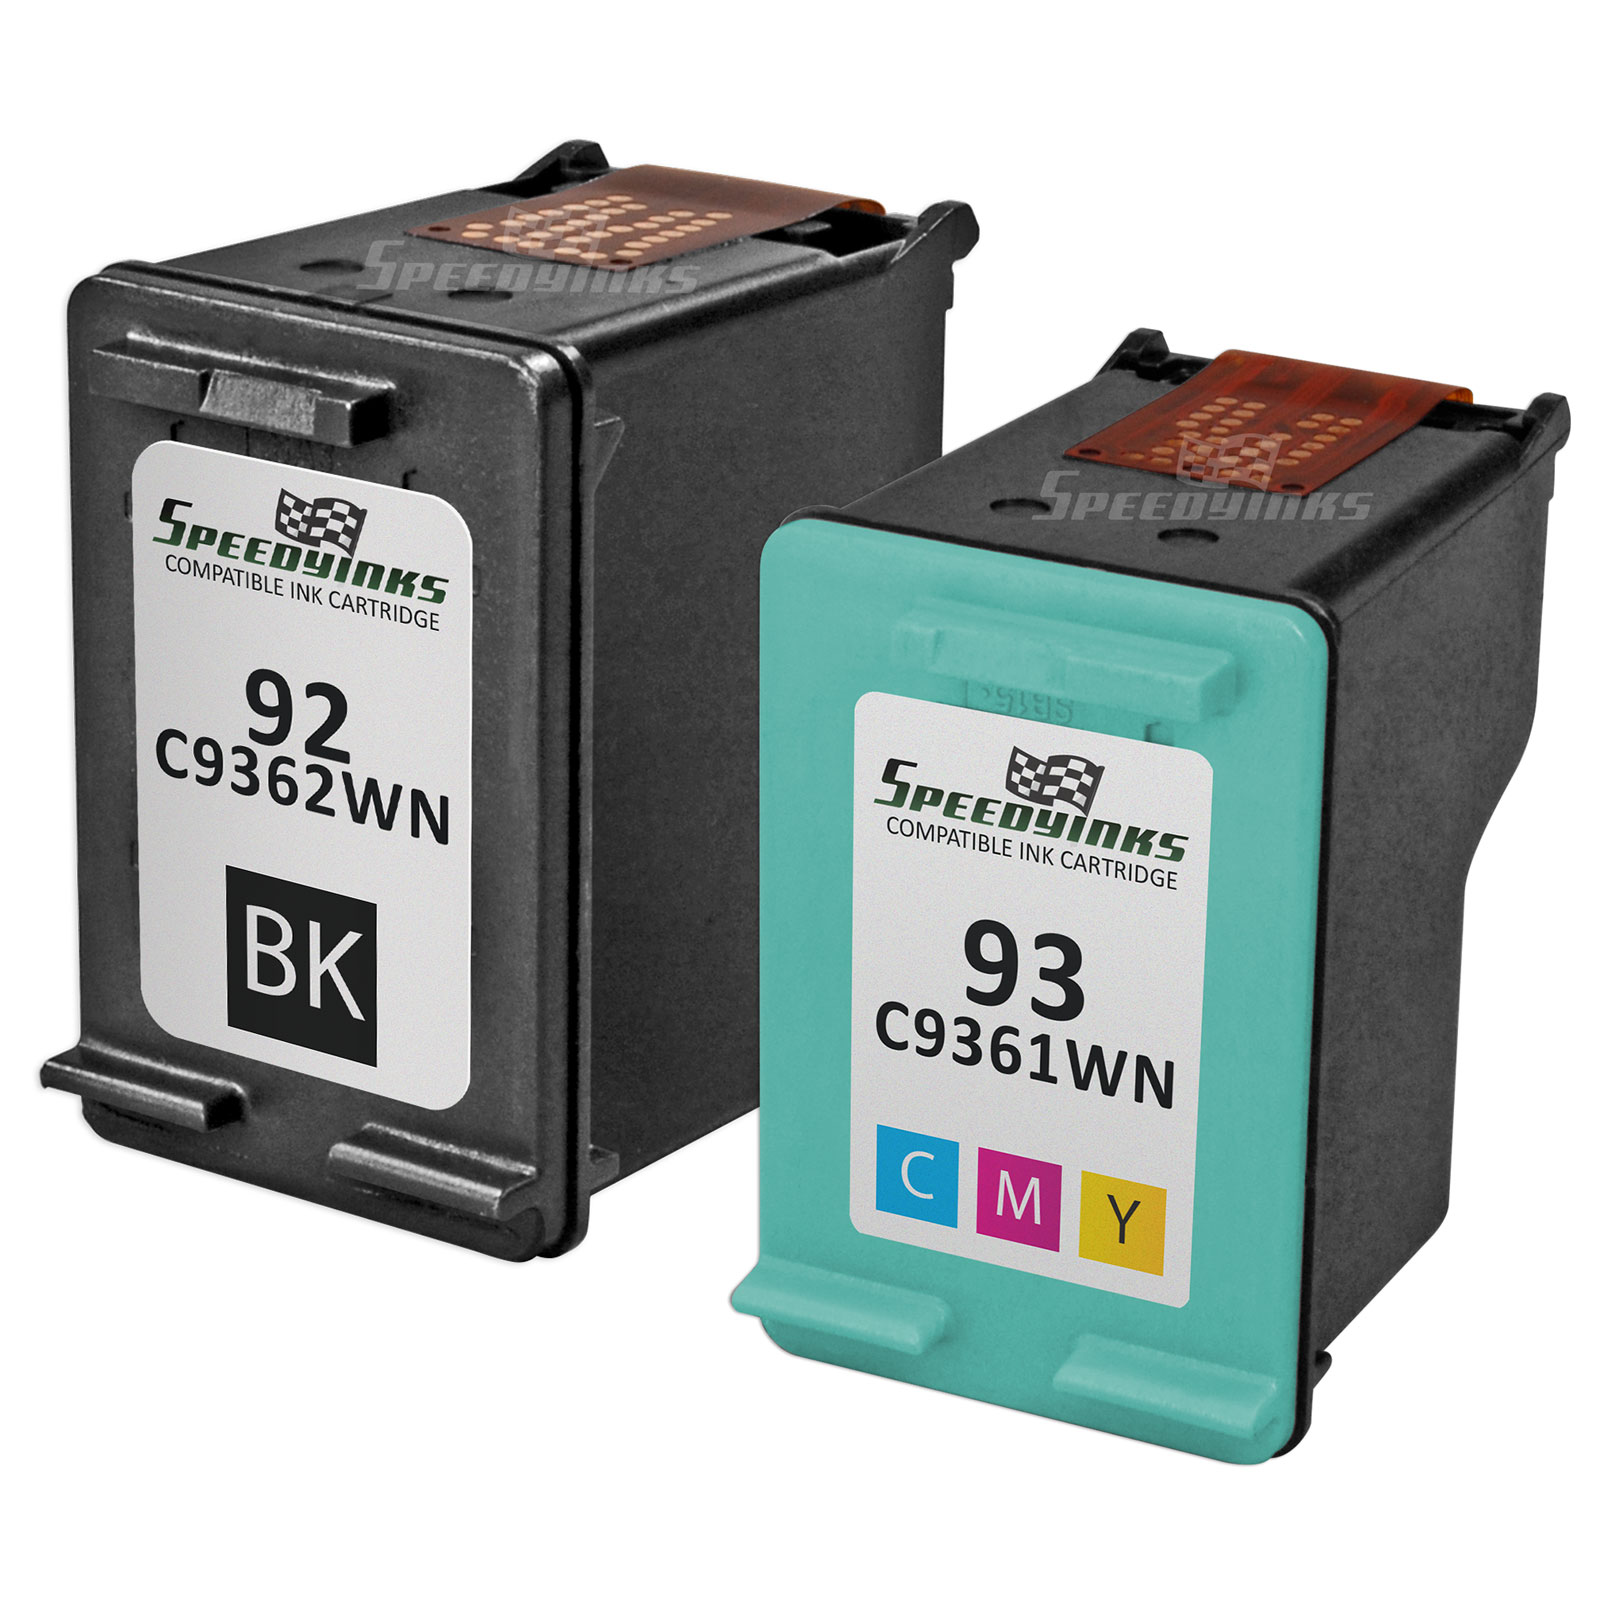 Speedy Inks - 2PK Remanufactured replacement for HP 92 C9362WN & HP 93 C9361WN Ink Cartridge Set: 1 Black & 1 Color - image 4 of 4